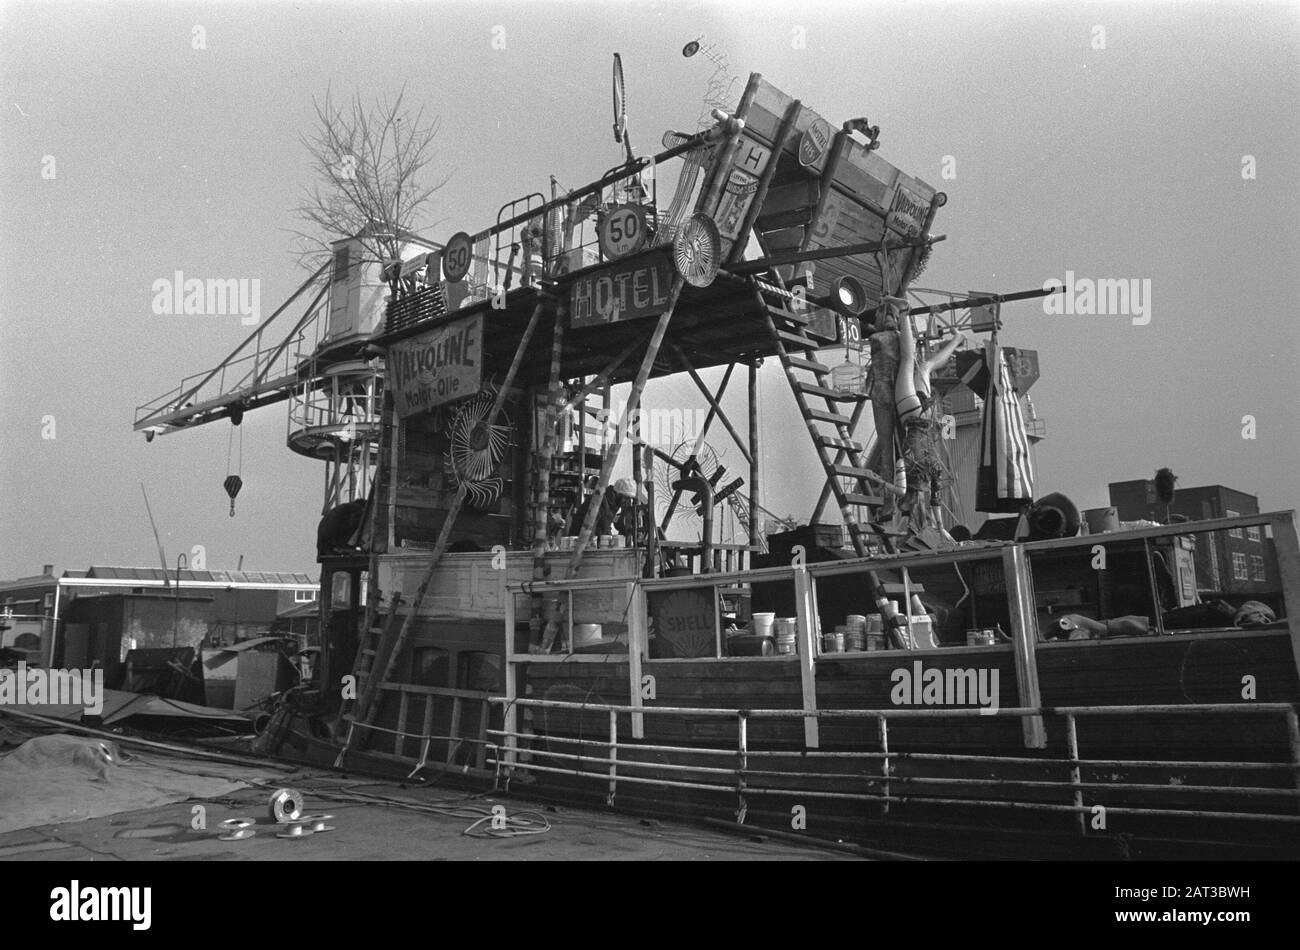 The ship of Lowlands Weed Company gets Karl Marx as a figurehead for the recording of a French-Canadian film  The ship at the shipyard Date: February 28, 1974 Location: Amsterdam, Noord-Holland Keywords: drugs, films, ships Personal name: lowland weed company Stock Photo